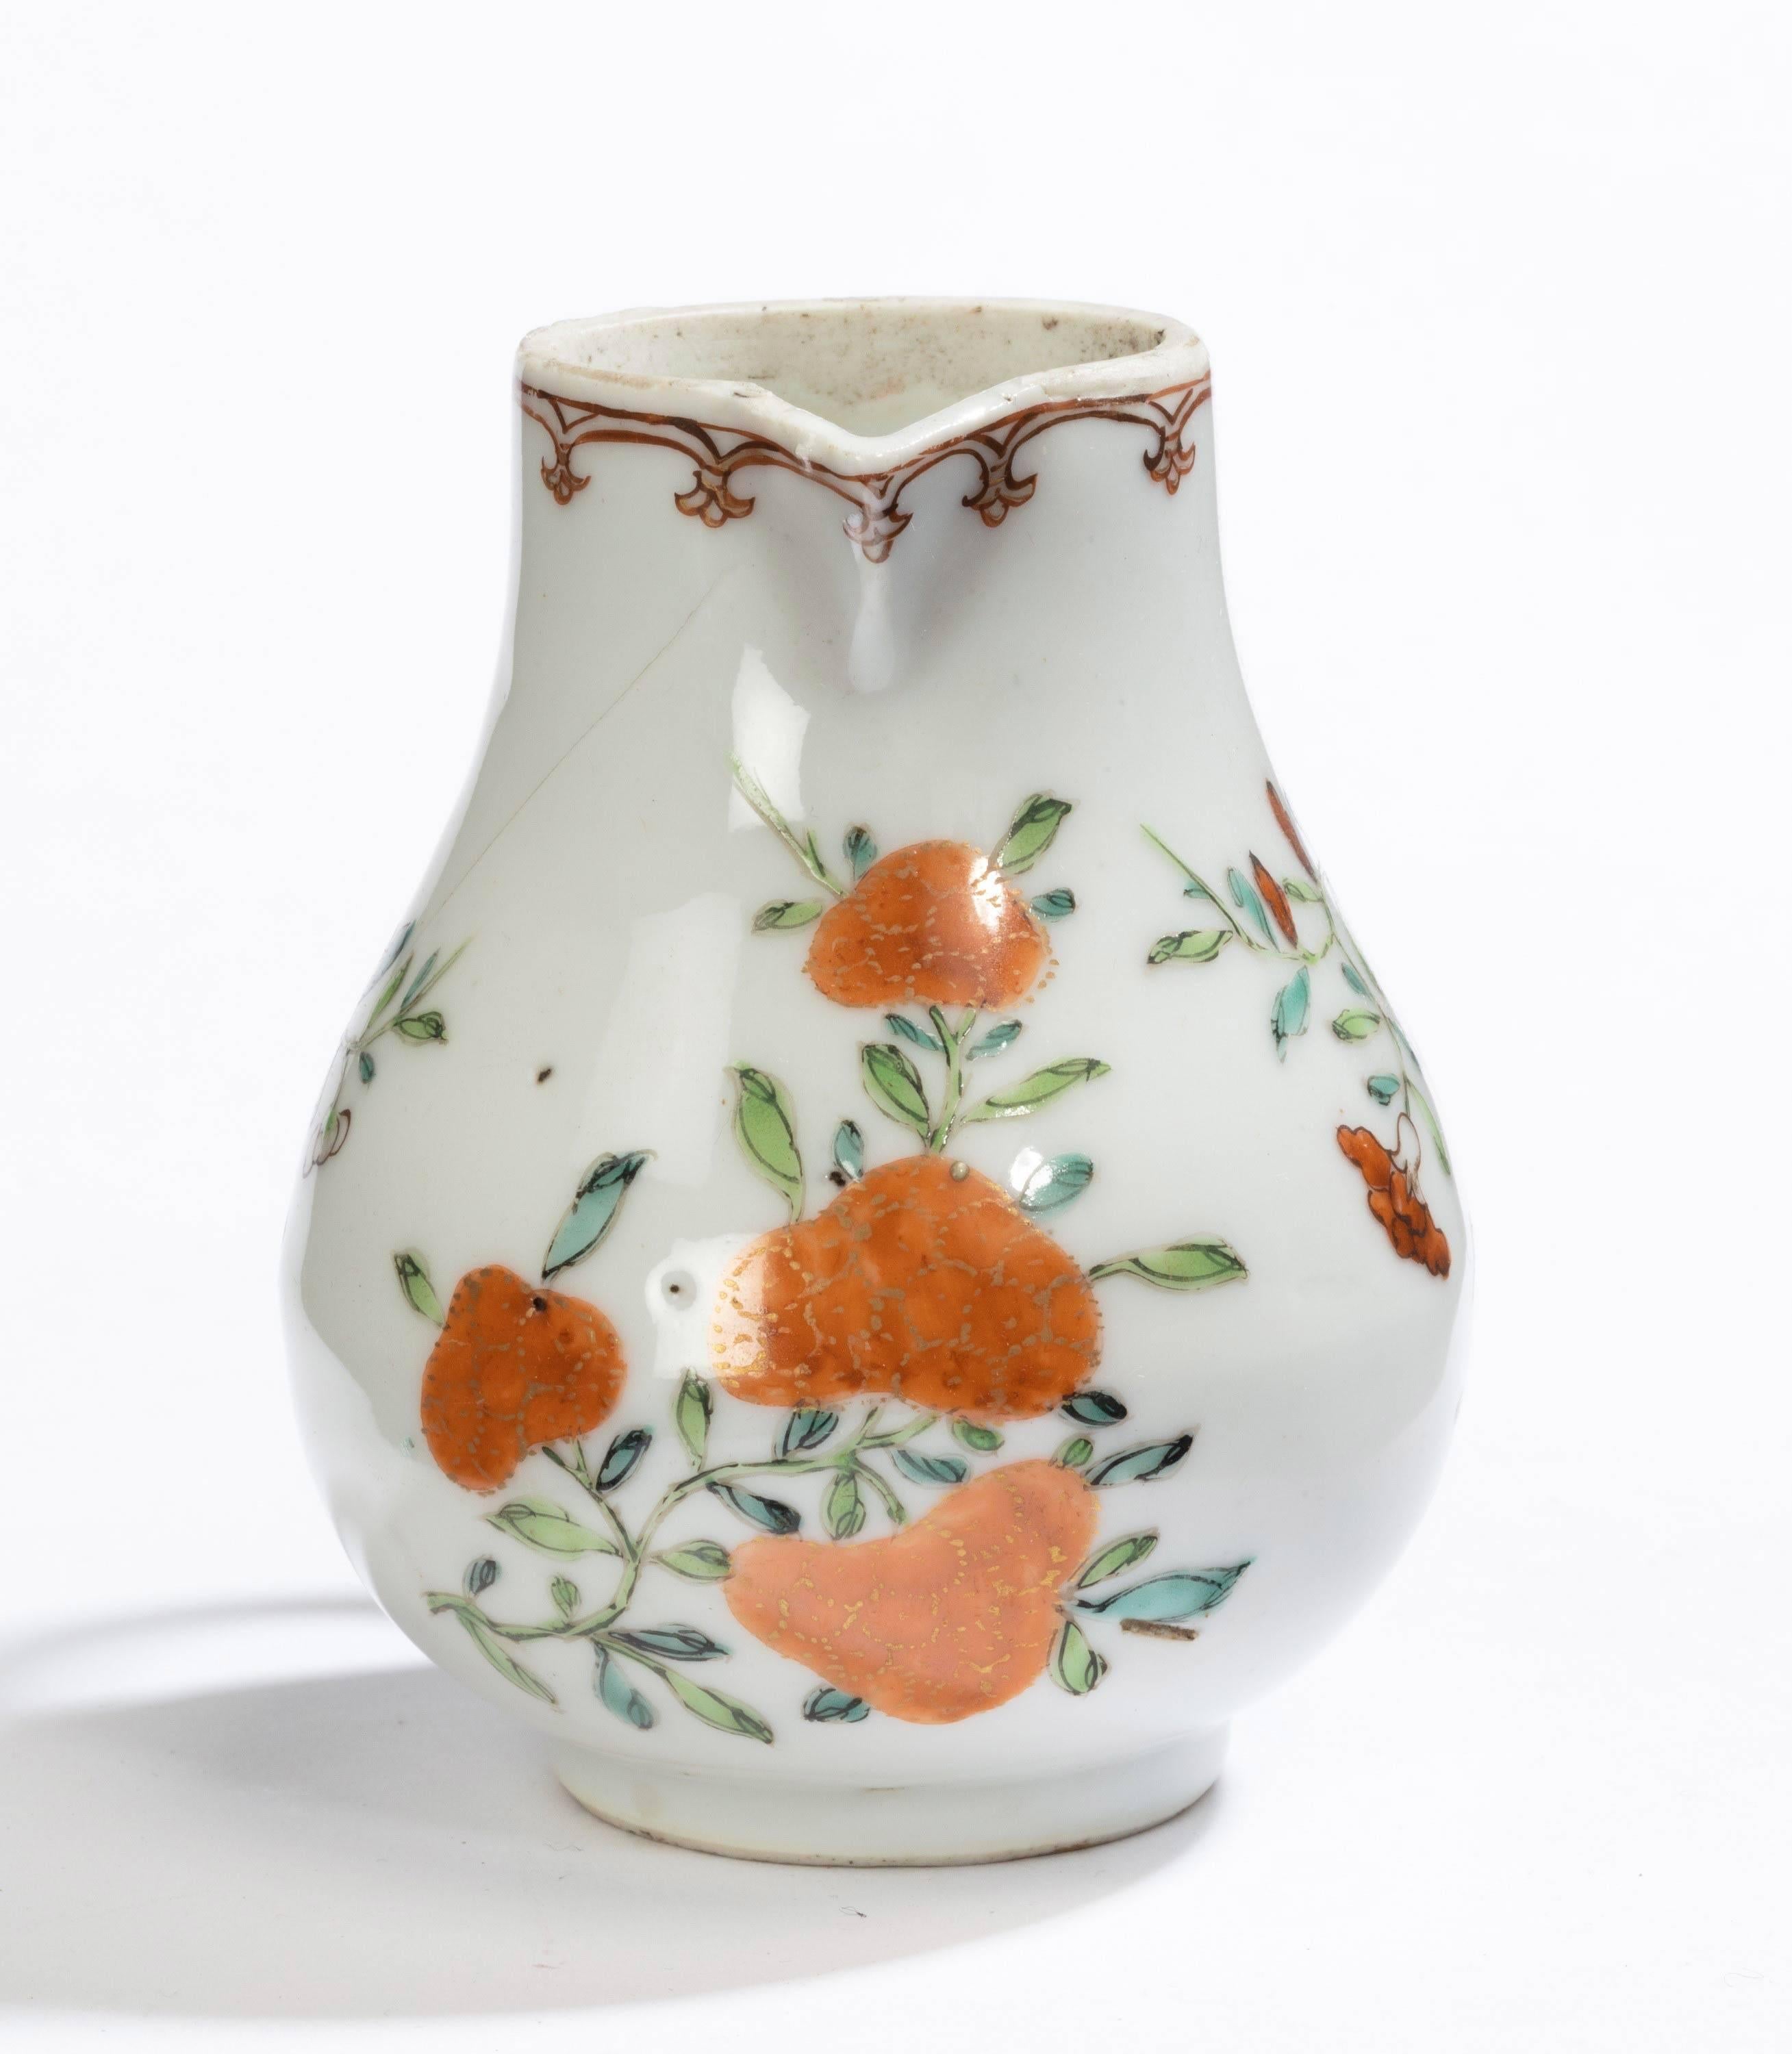 A late 18th century, porcelain sparrow beak jug. Overall, in mint condition.